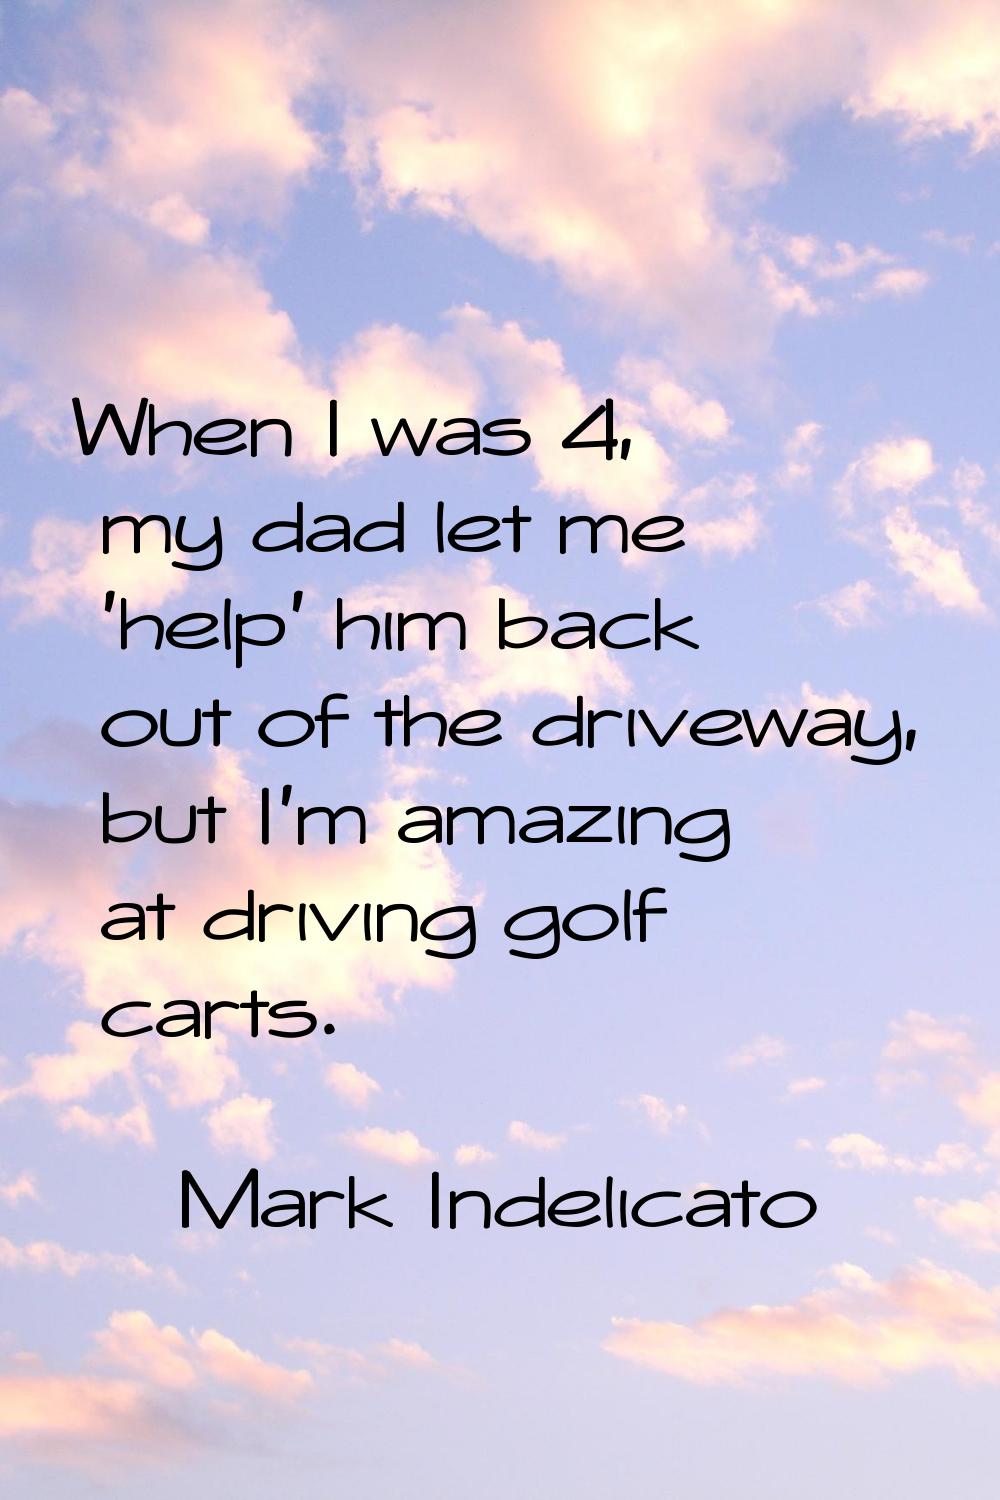 When I was 4, my dad let me 'help' him back out of the driveway, but I'm amazing at driving golf ca